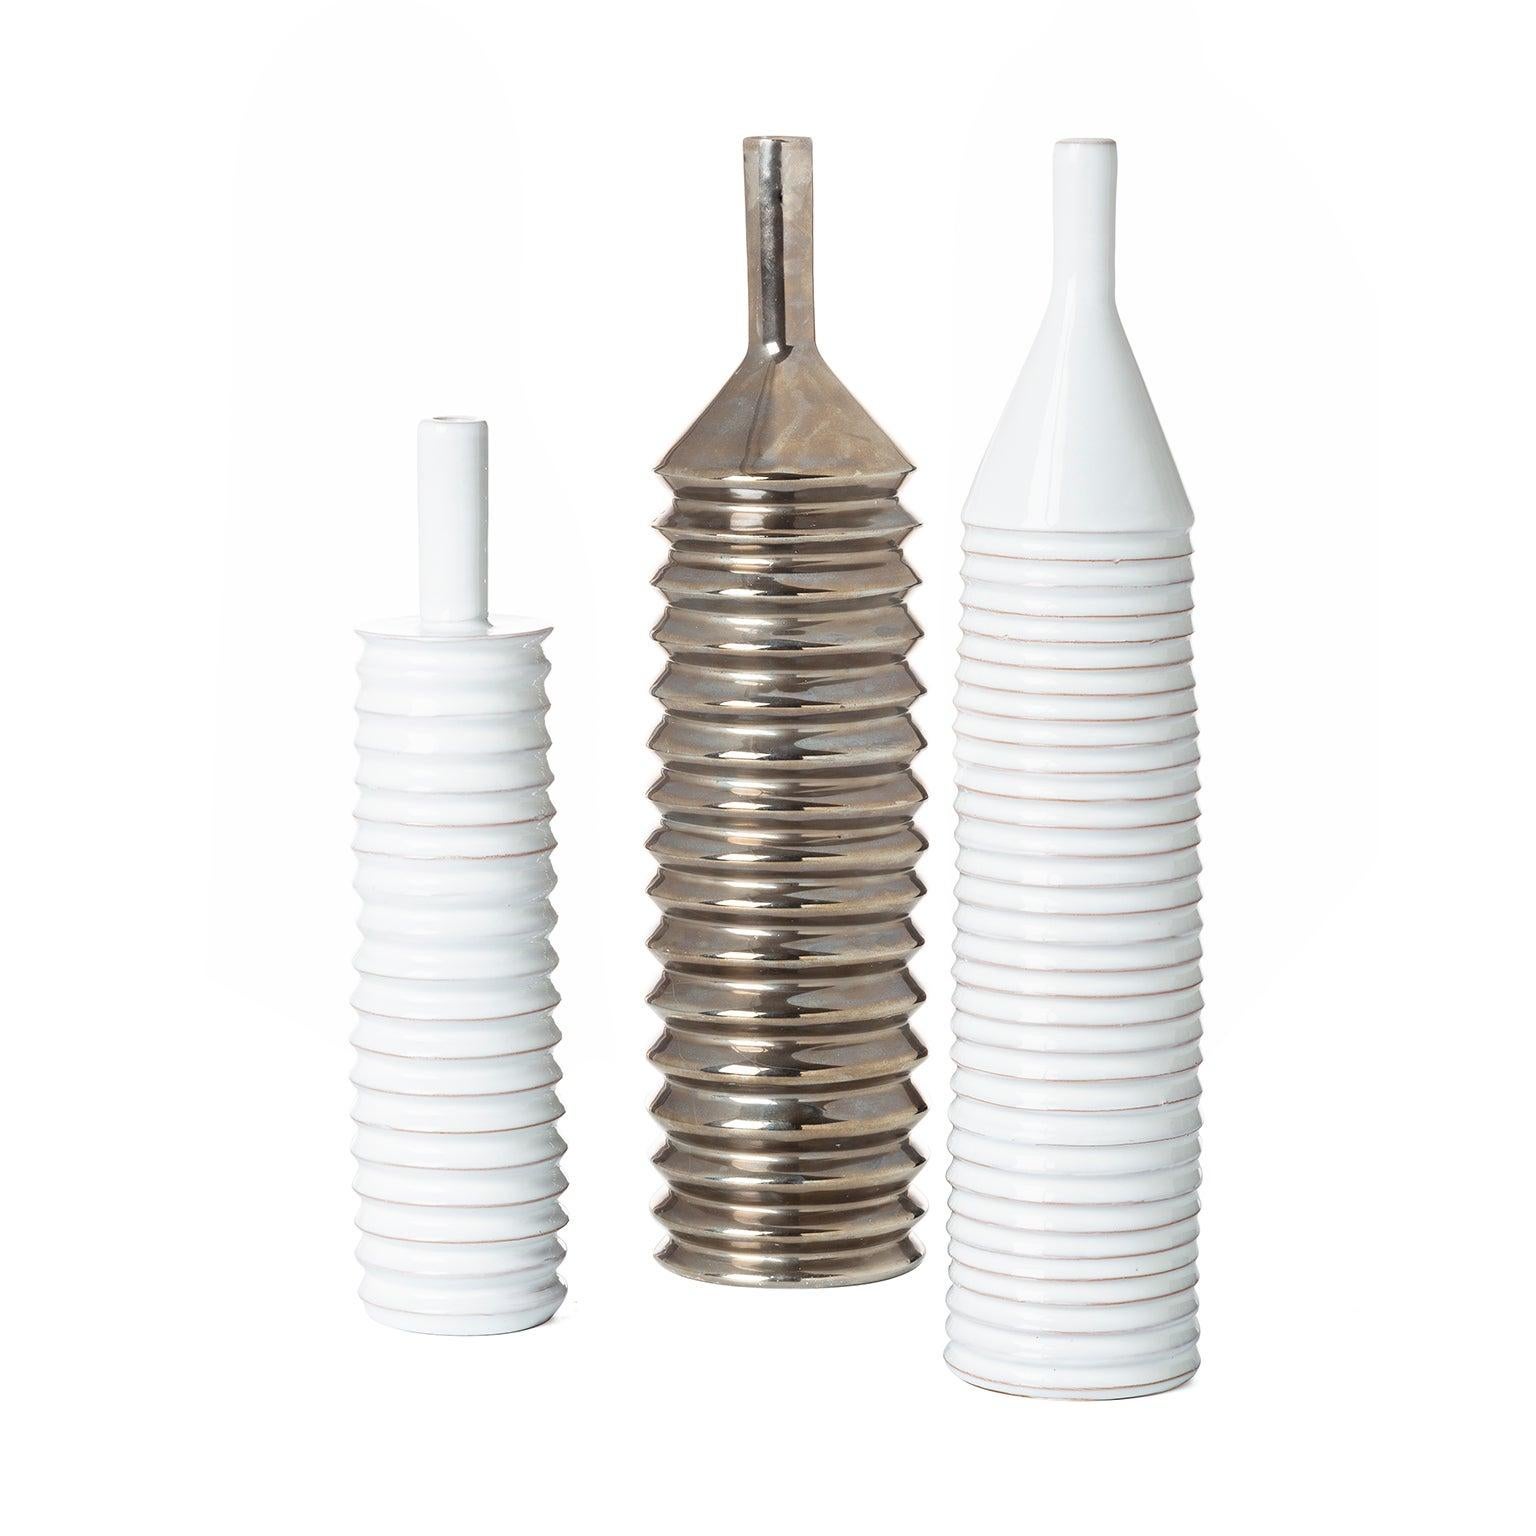 Set of decorative bottles made on the potter’s wheel with plastic relief.
Work born in the 1980s out of the author's research into traditional techniques and innovative ideas, a synthesis of minimalism and postmodernism.
Research recalling the